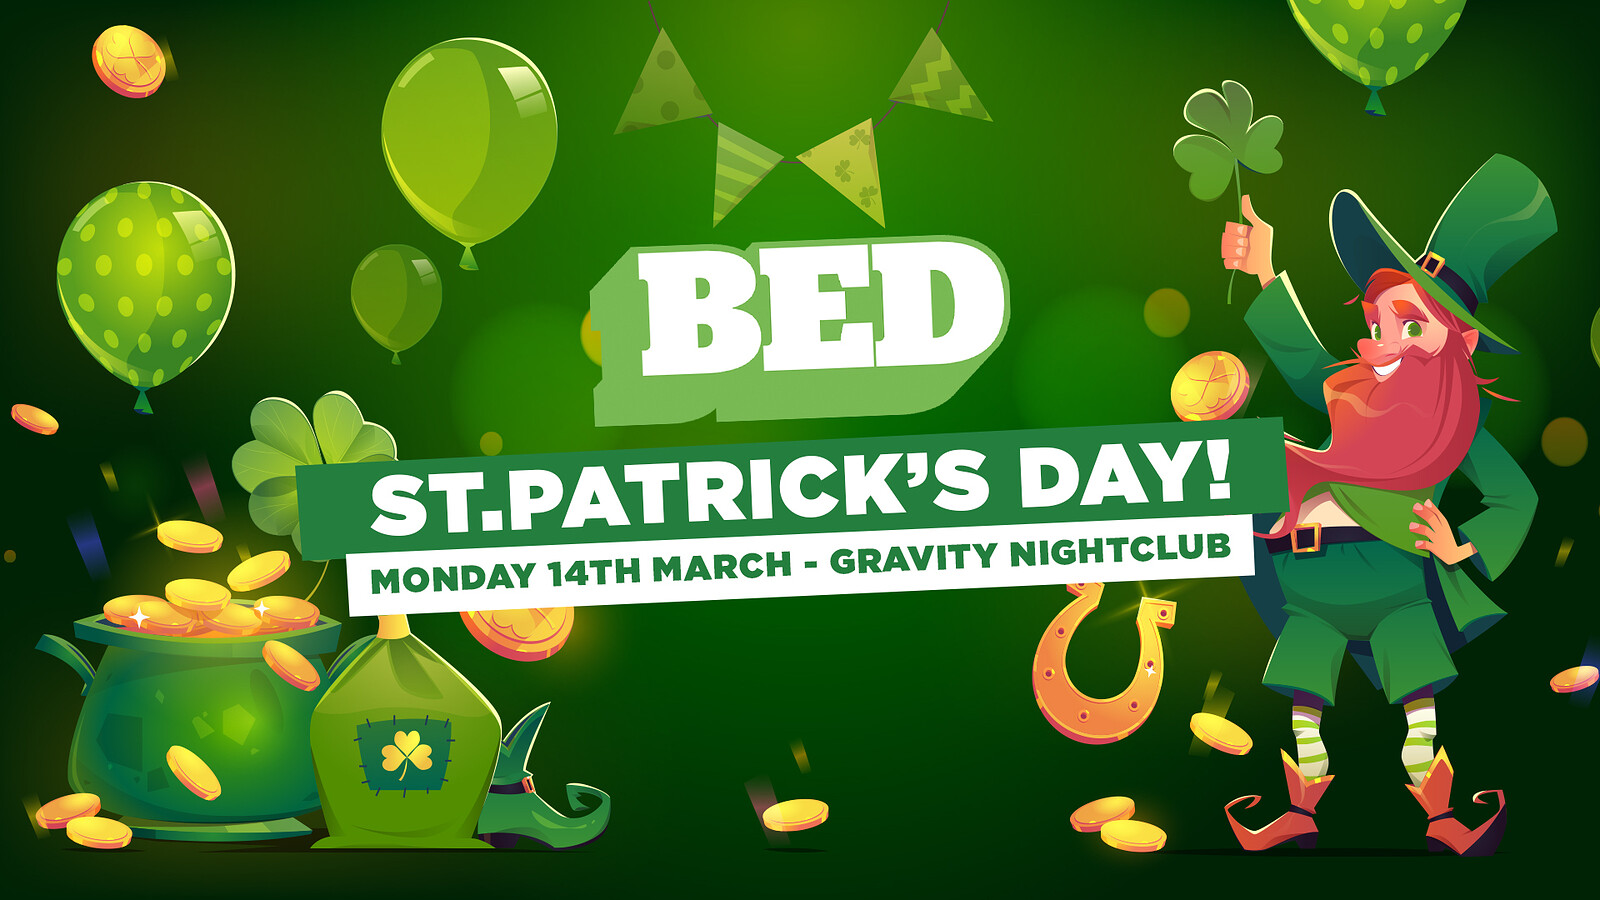 BED: St.Patrick's Day at Gravity